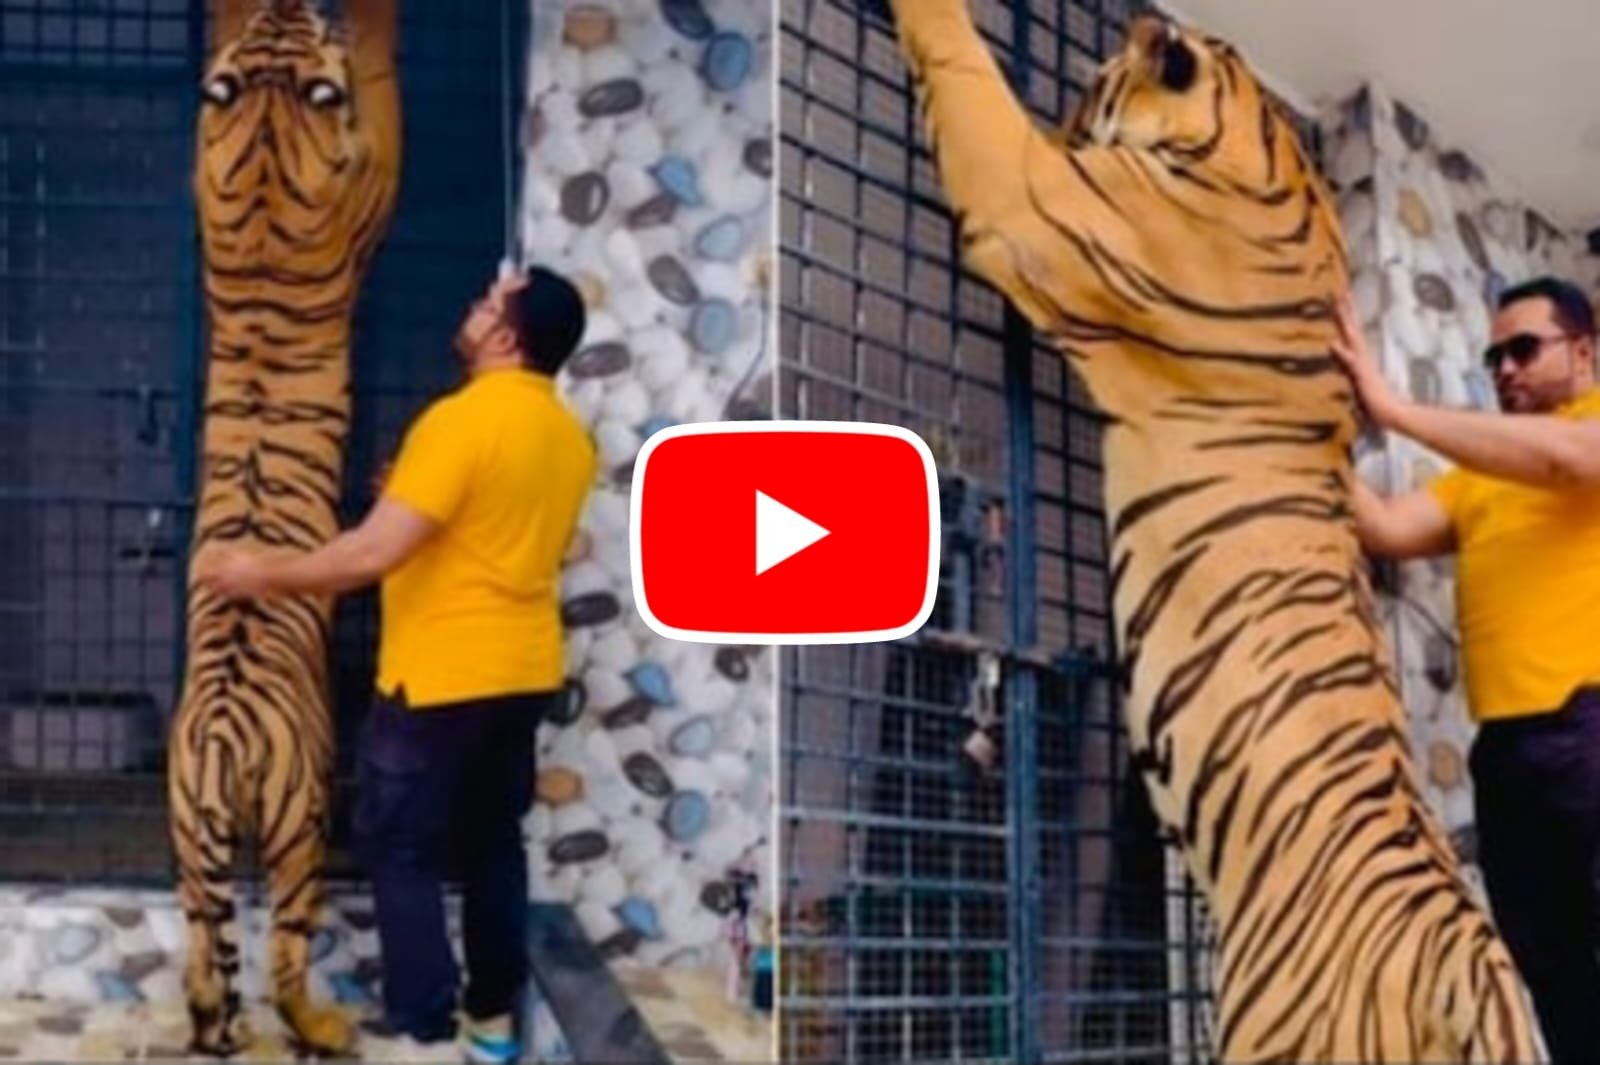 Bagh Ka Video: The person started looking small in front of the ferocious tiger standing on two legs.